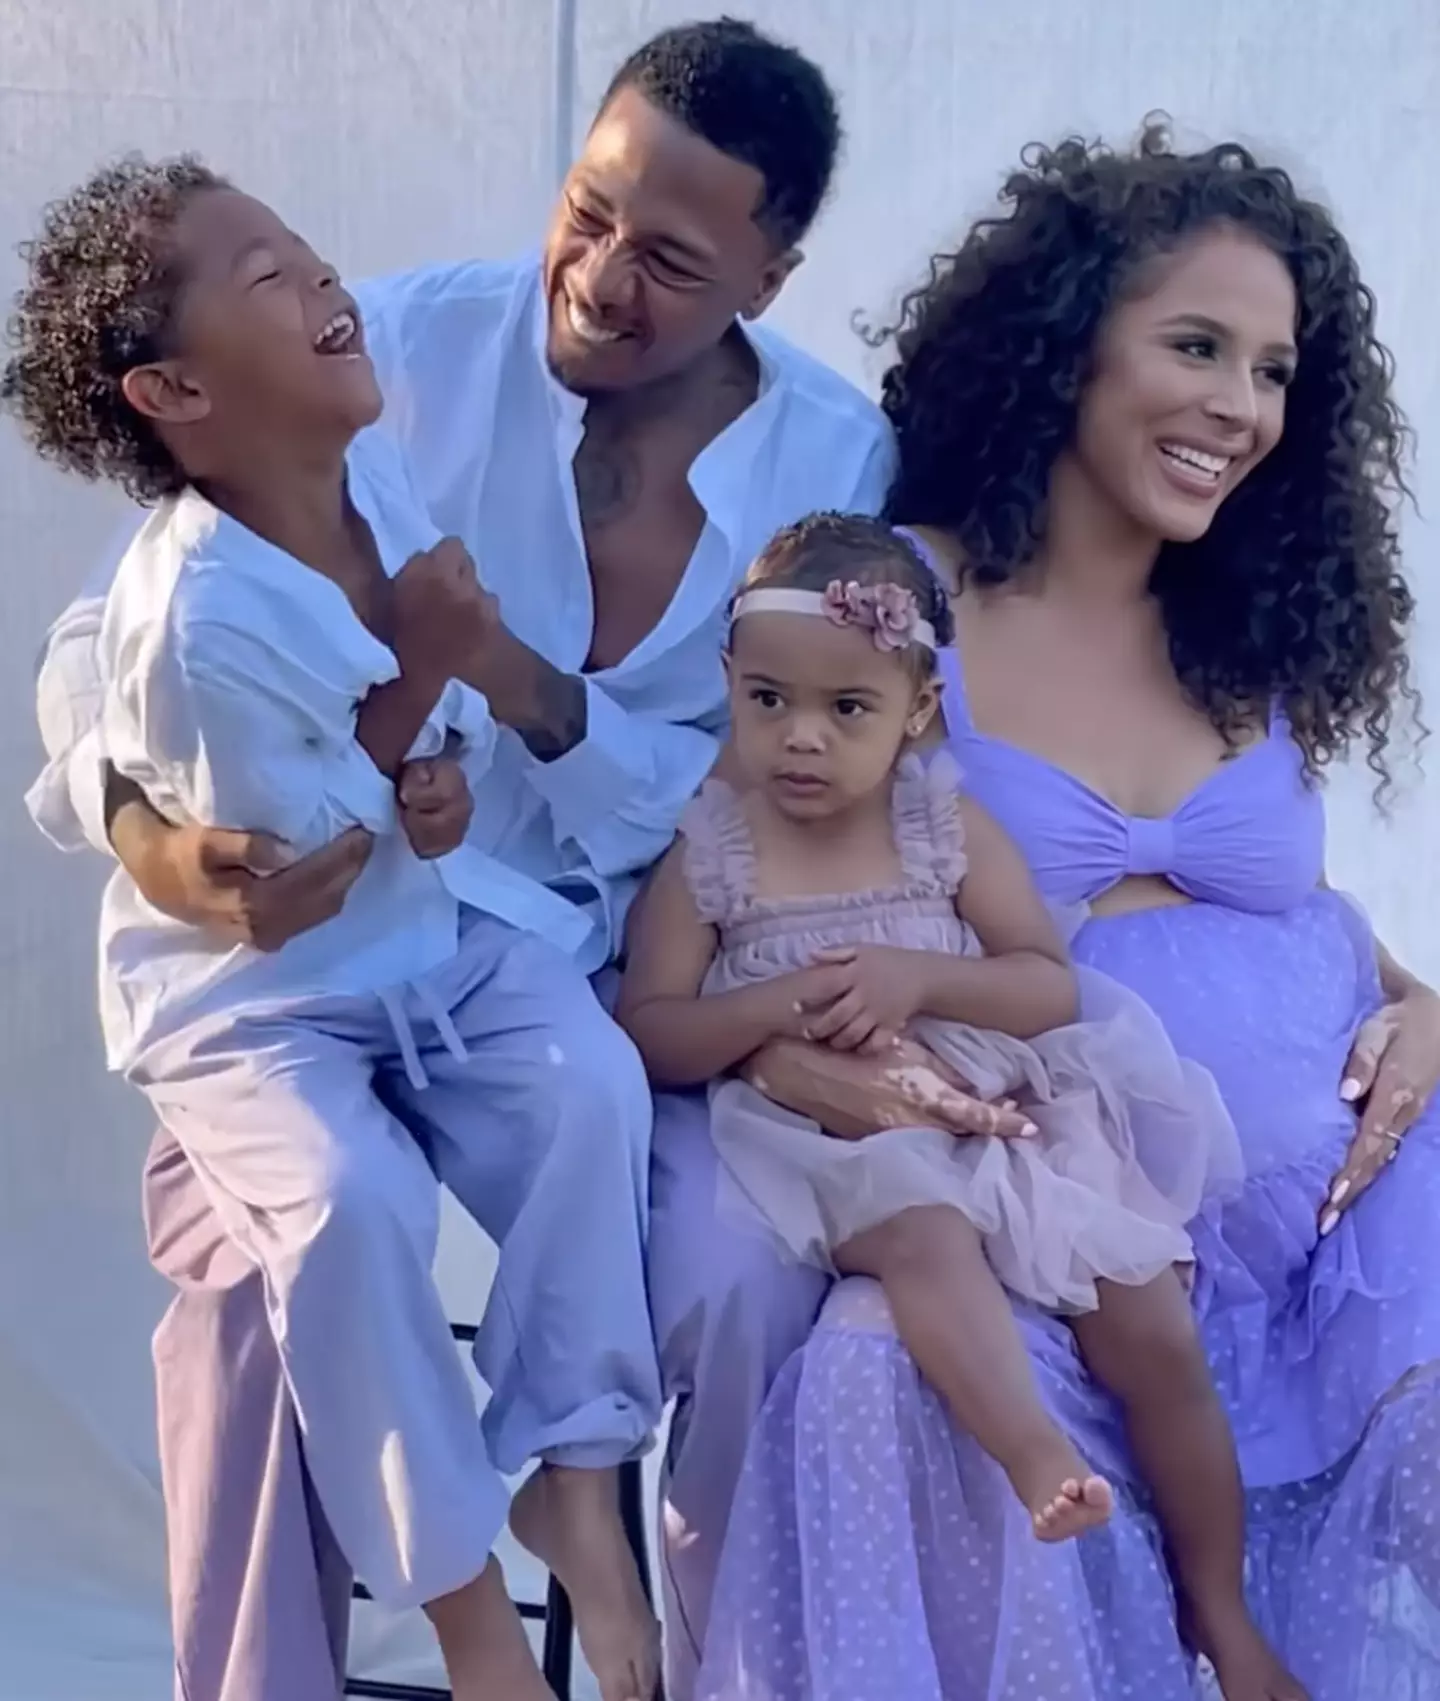 Nick Cannon has previously explained why he won't stop having children.